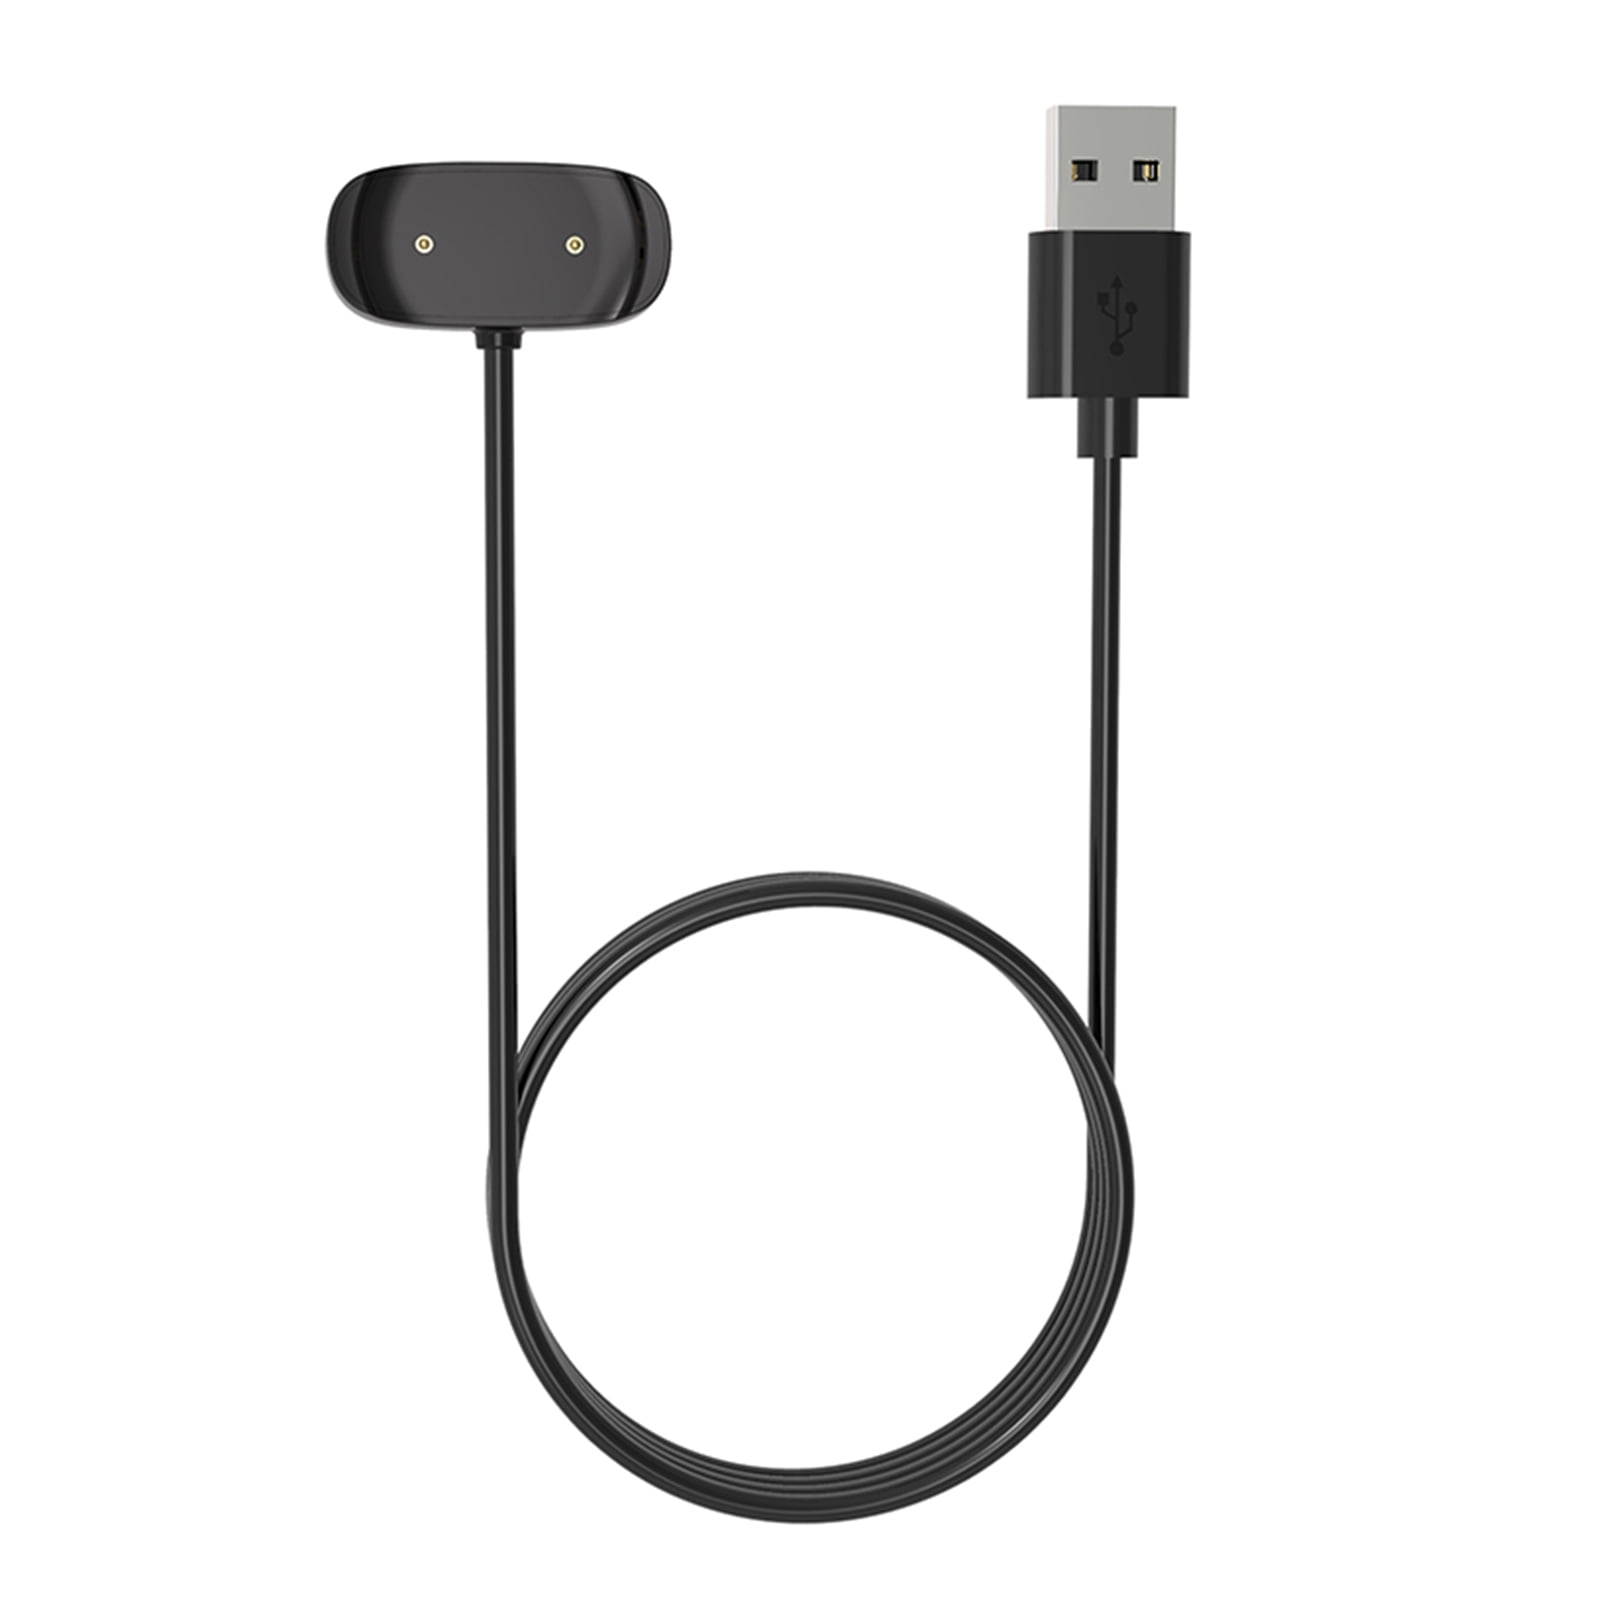 OEM USB Charging Cable For Microsoft Band 2 Smart Wristband 